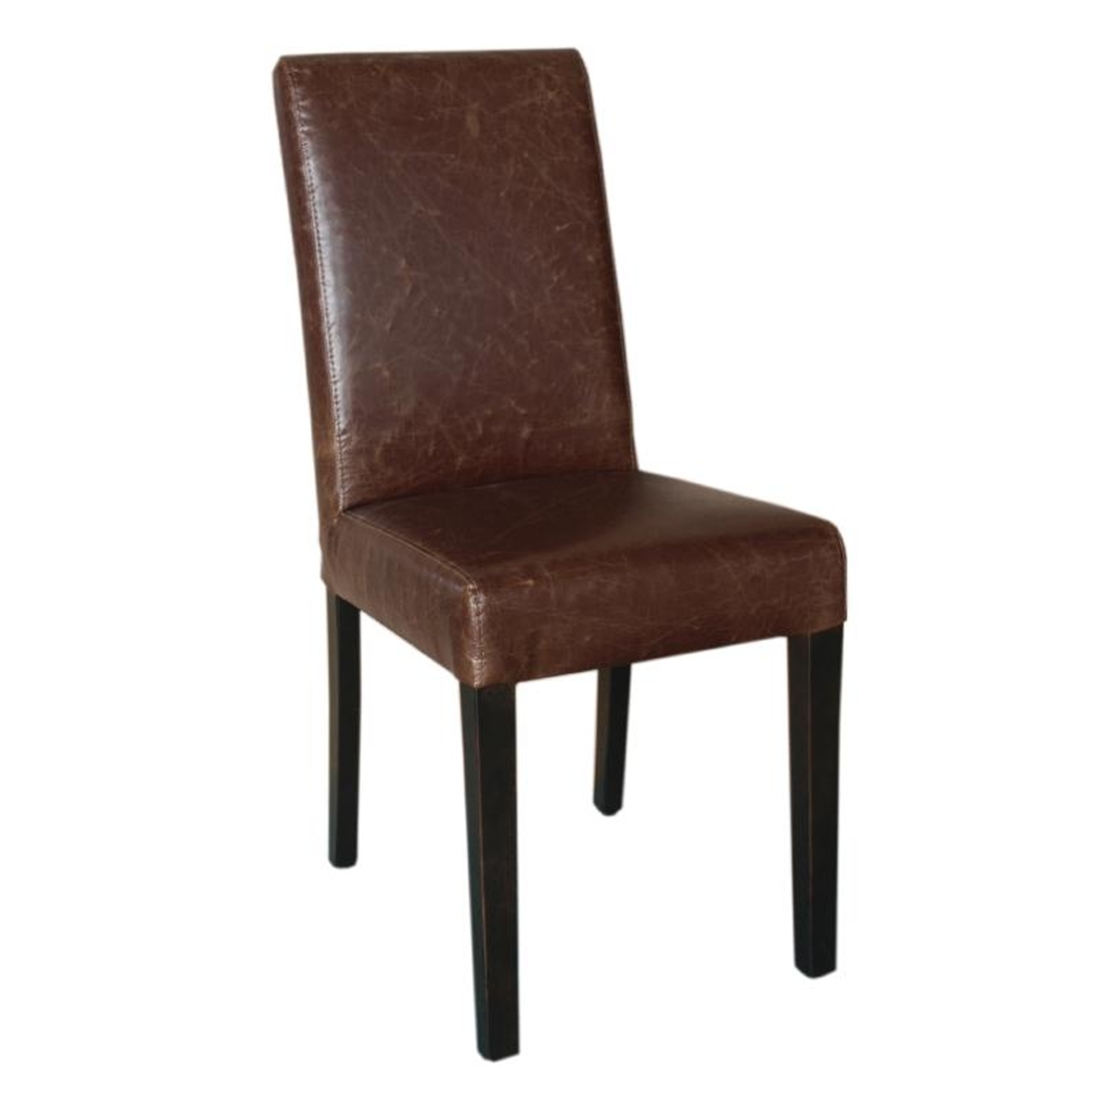 Bolero Faux Leather Dining Chair Antique Tan (Pack of 2)